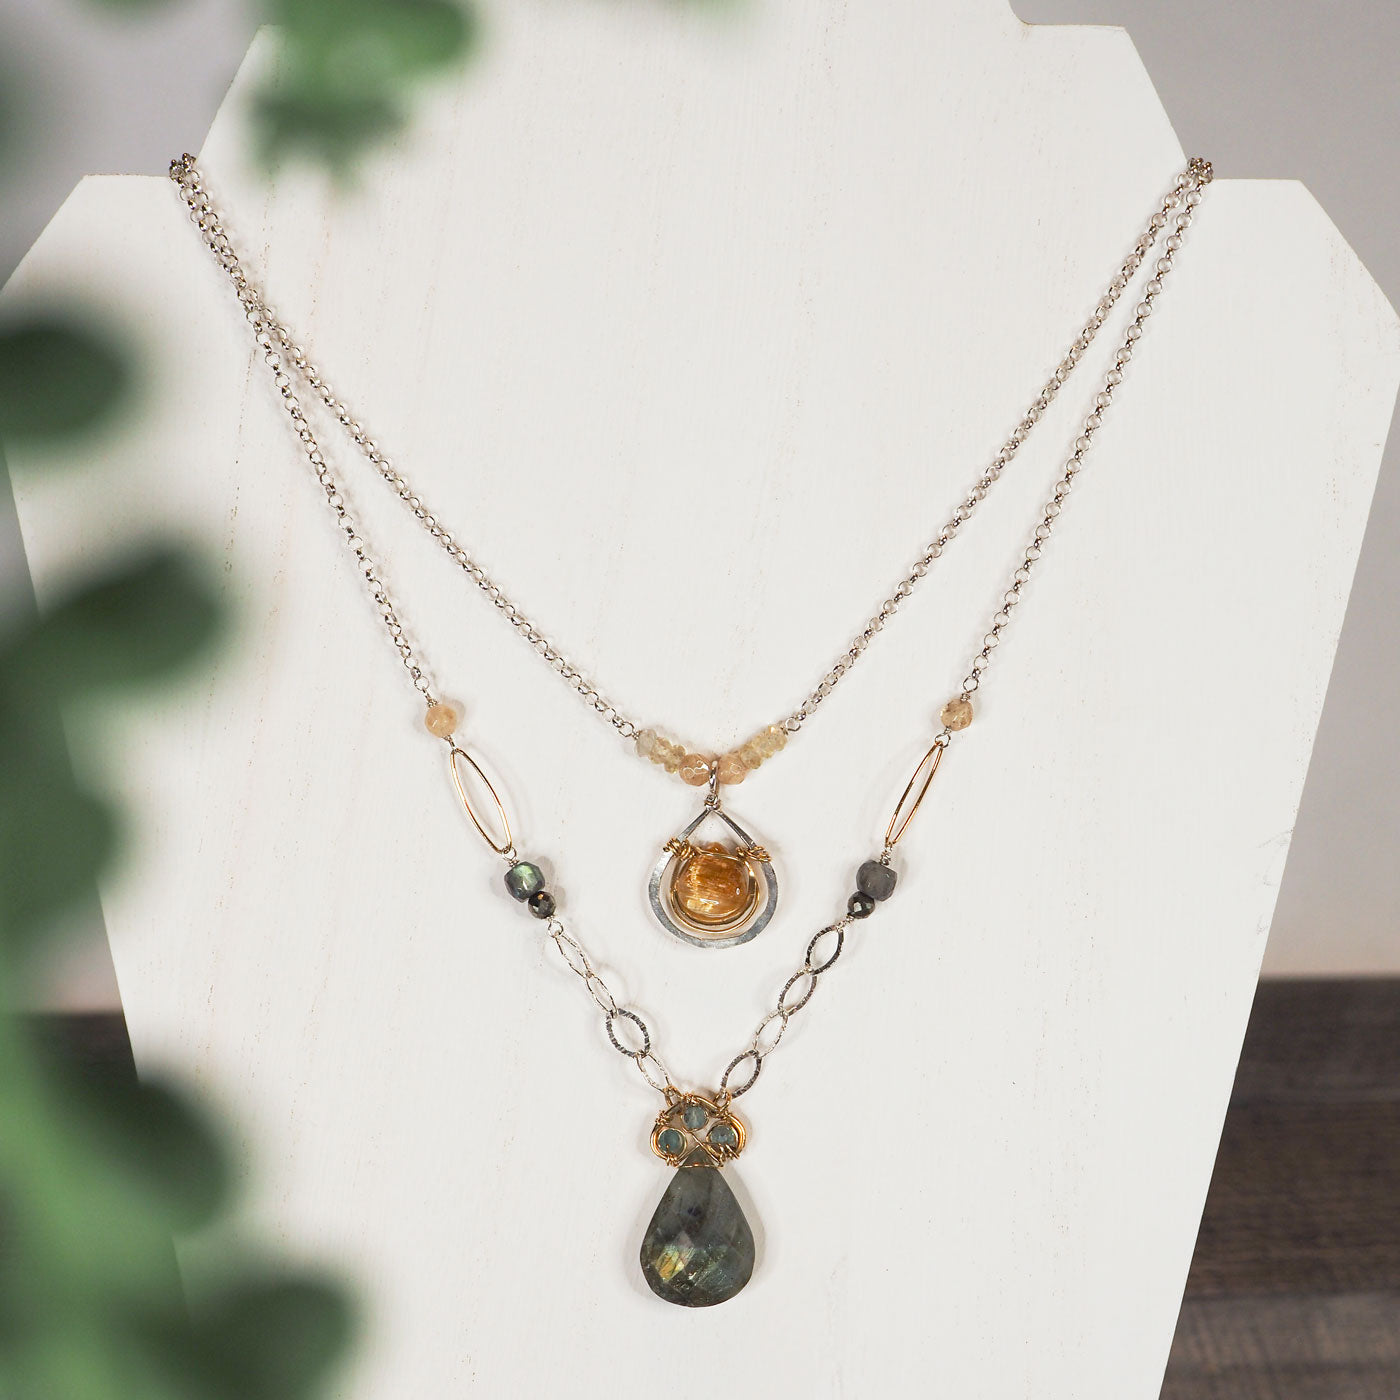 This beautifully layered statement necklace features a faceted gold rutilated quartz bezel framed in hammered 14K gold filled and sterling silver as well as a pear-shaped labradorite drop crowned with three apatite gems, linked together in brass into the shape of a spade.